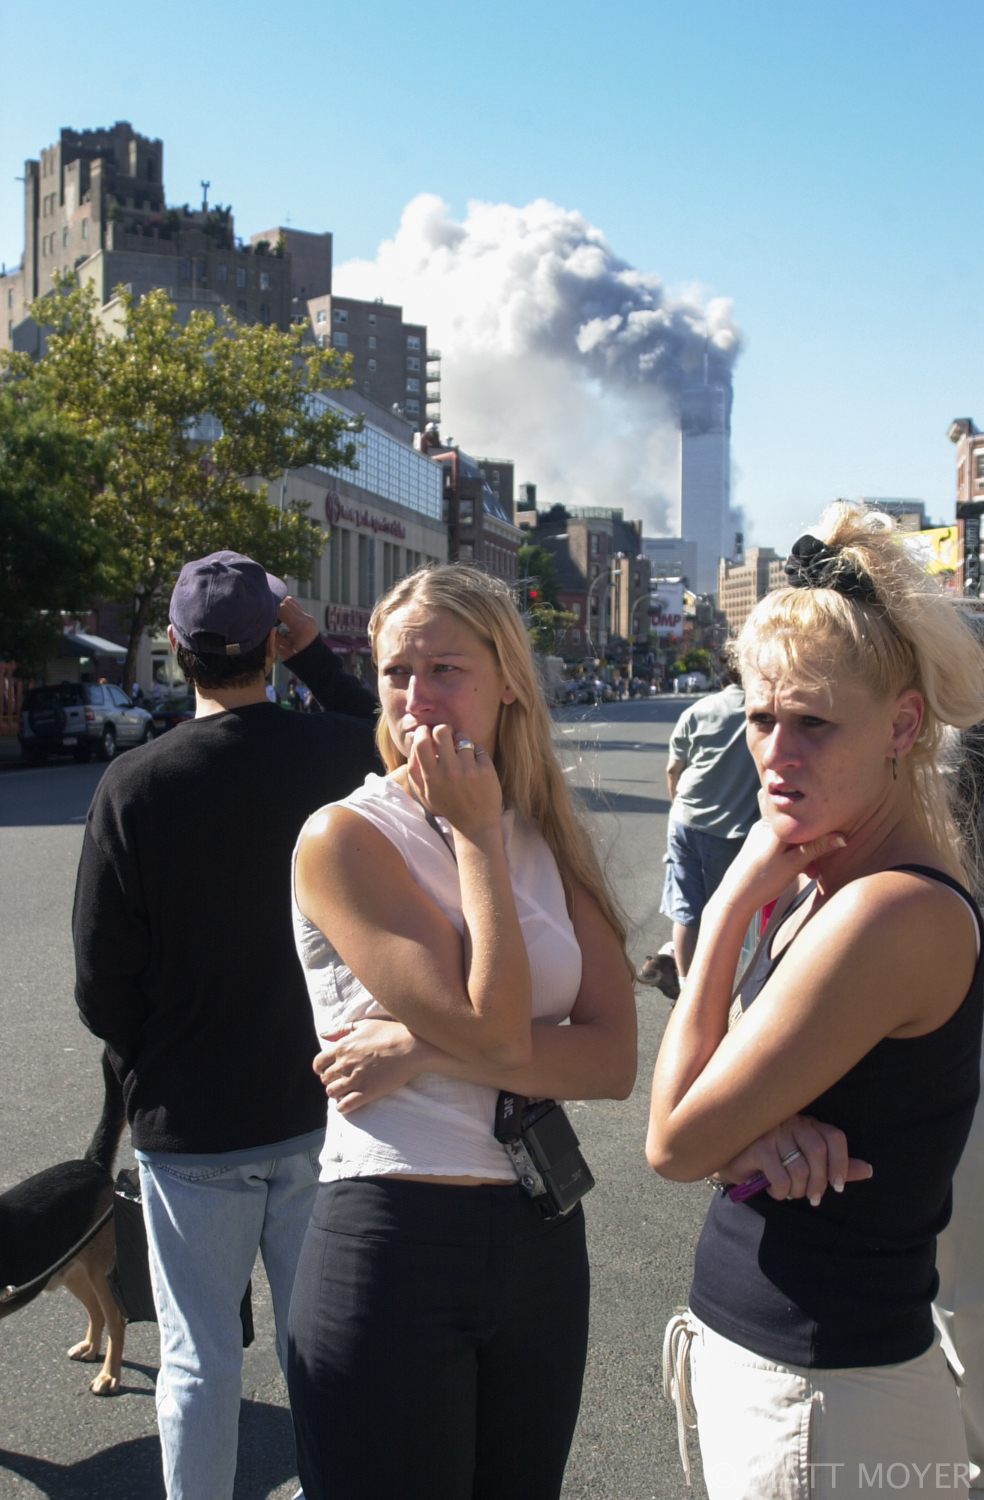  Judith Puckett-Rinella (left) and Janie Payne (right) stand in disbelief during the terrorist attack on the World Trade Center on Sept. 11, 2001. 